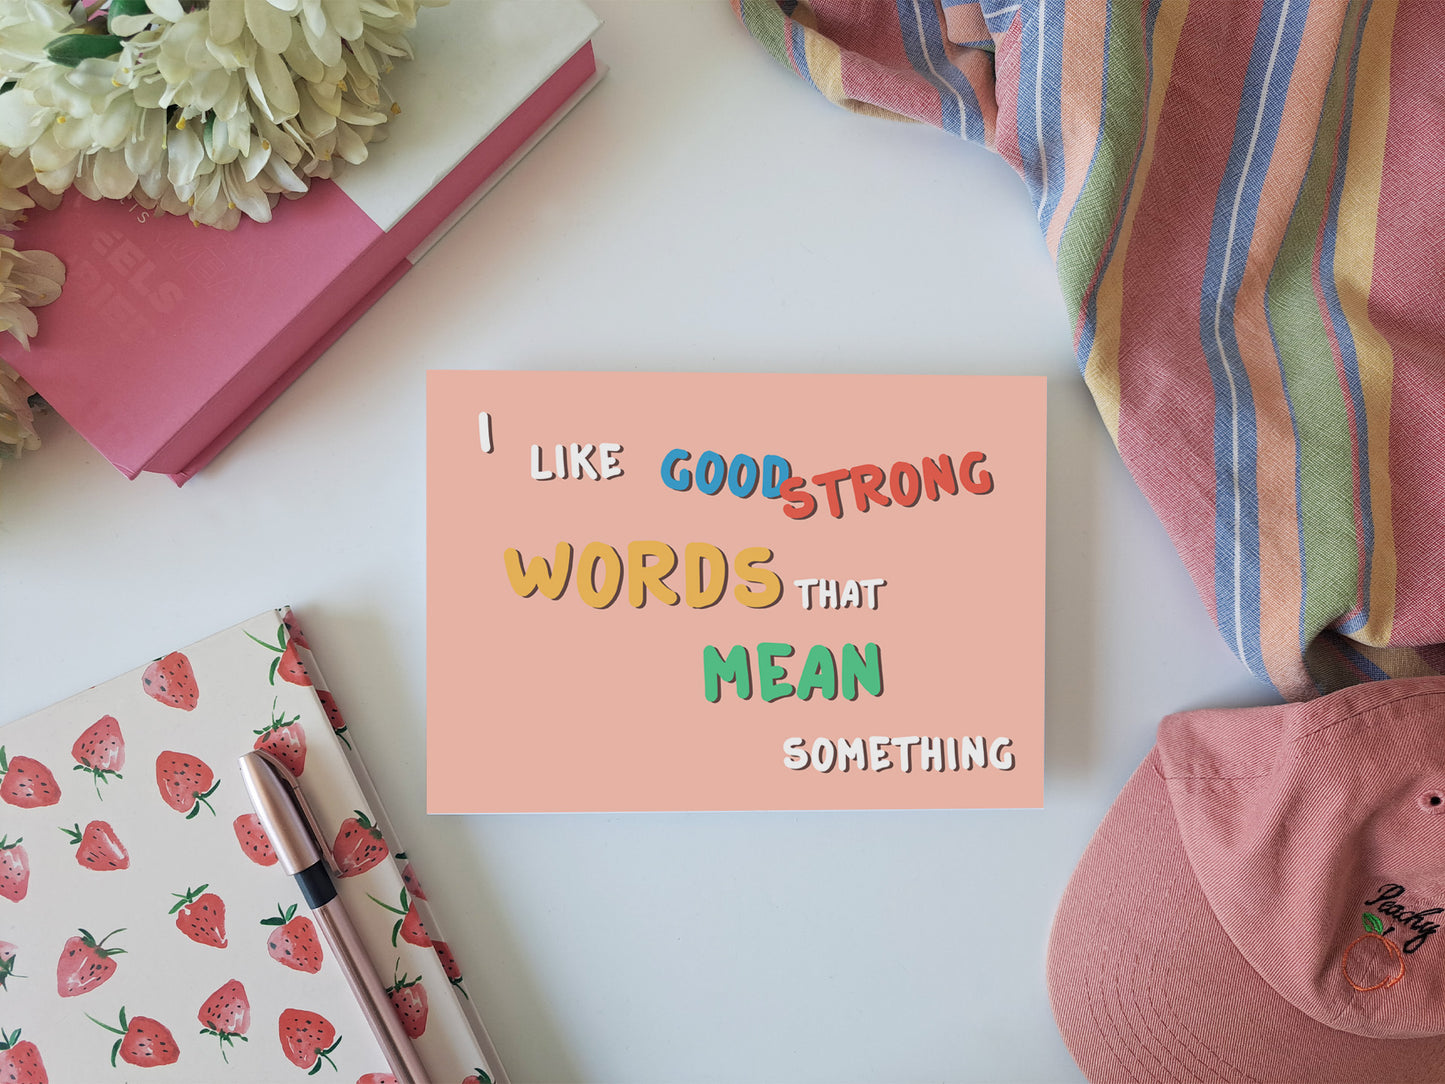 I Like Good Strong Words that Mean Something - Little Women - Quote Art